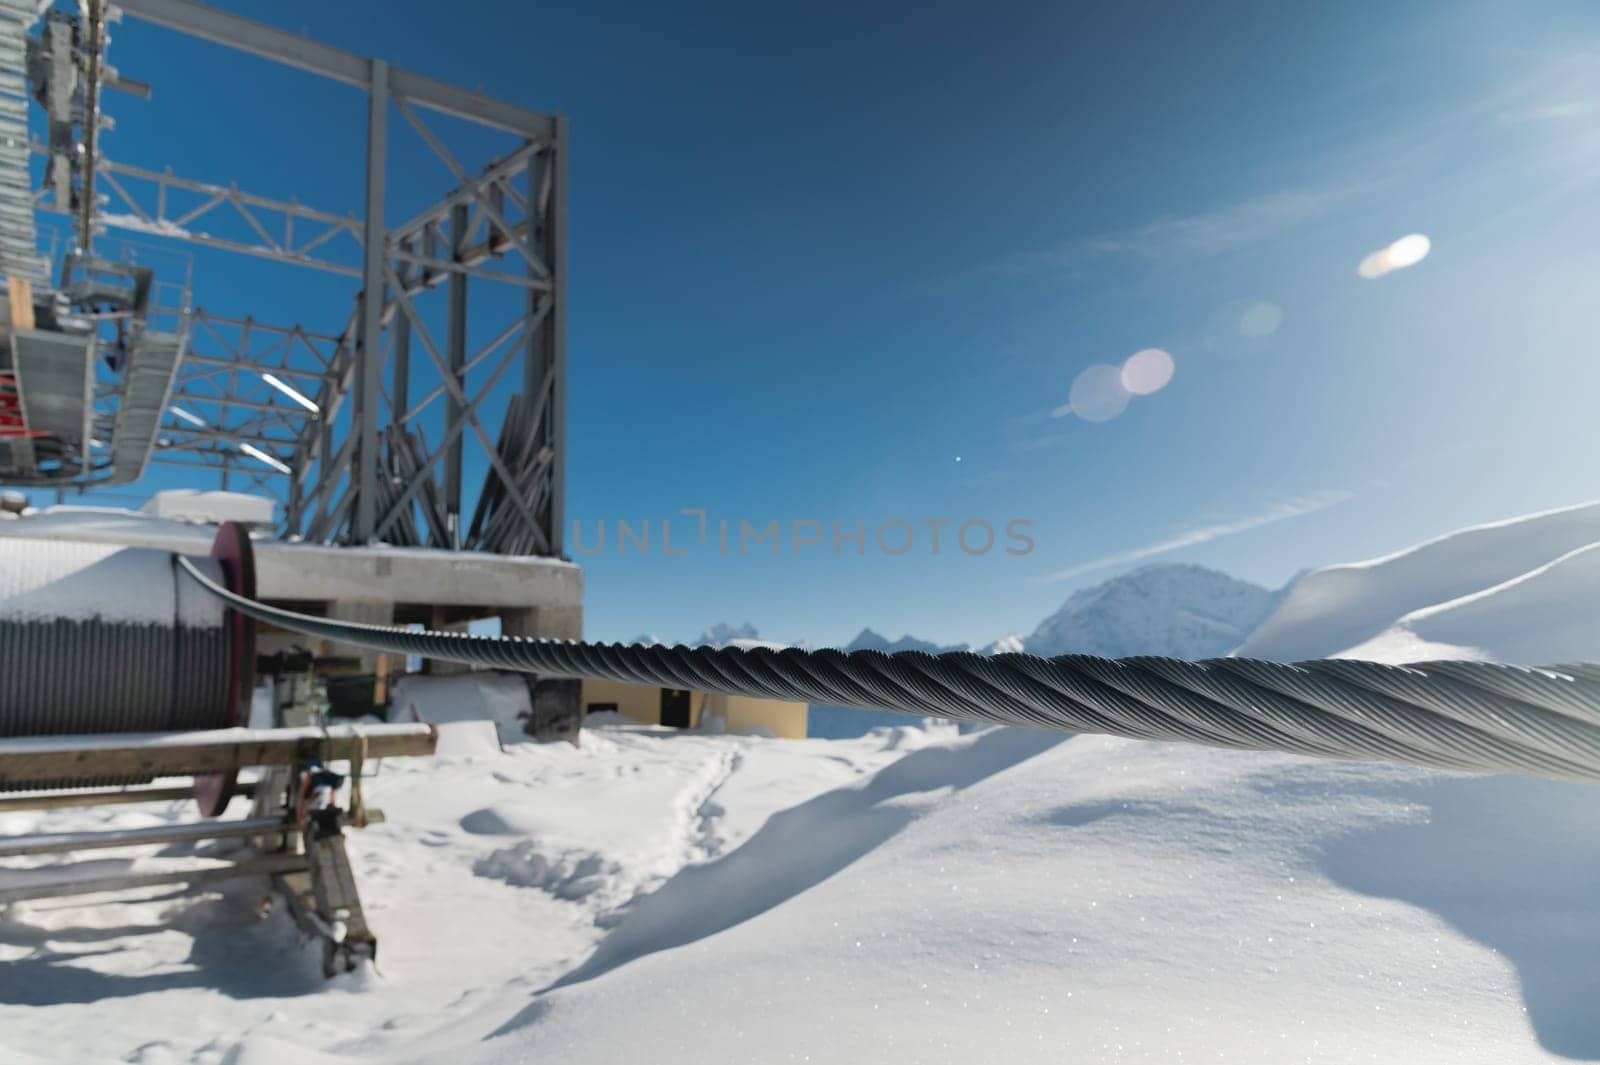 A cable car station high in the mountains under construction. Snowy mountain landscape and construction of a metal structure for a cable car by yanik88